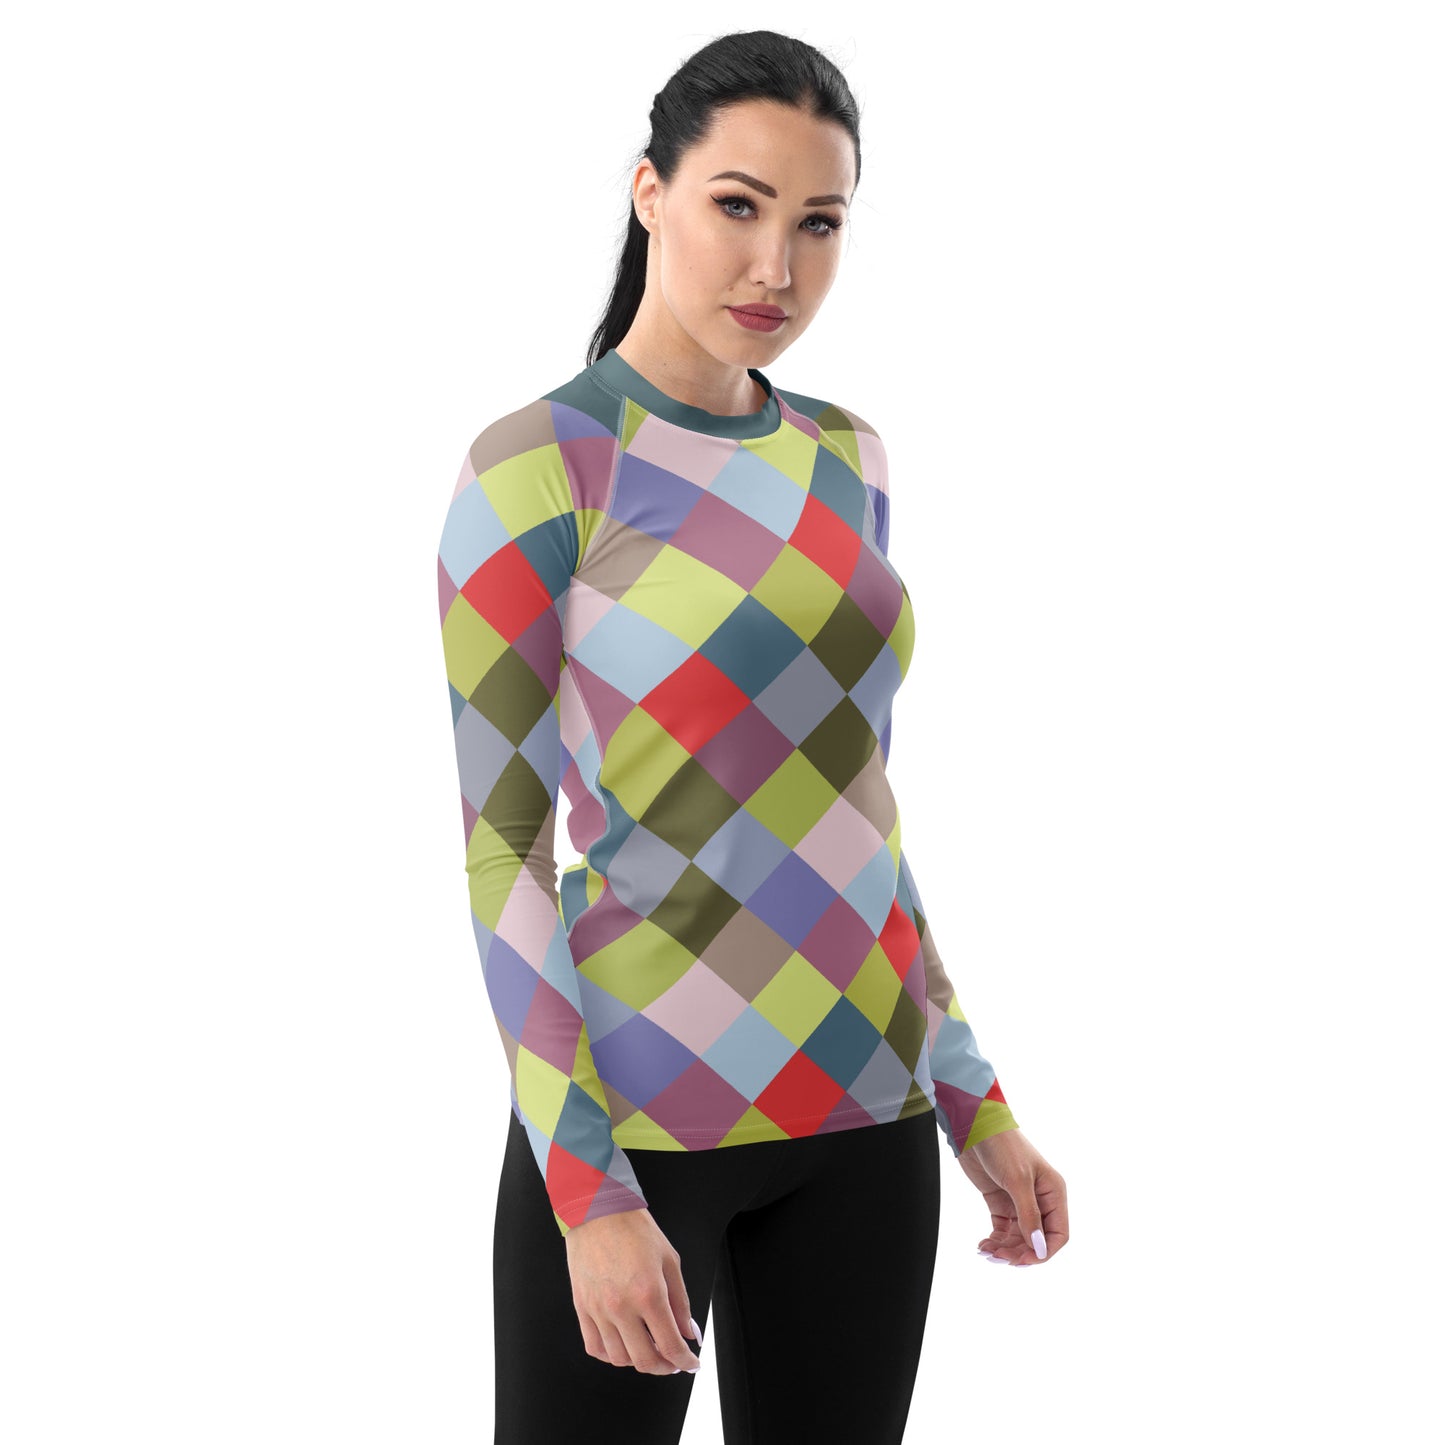 Colorful - Inspired By Harry Styles - Sustainably Made Women's Rash Guard